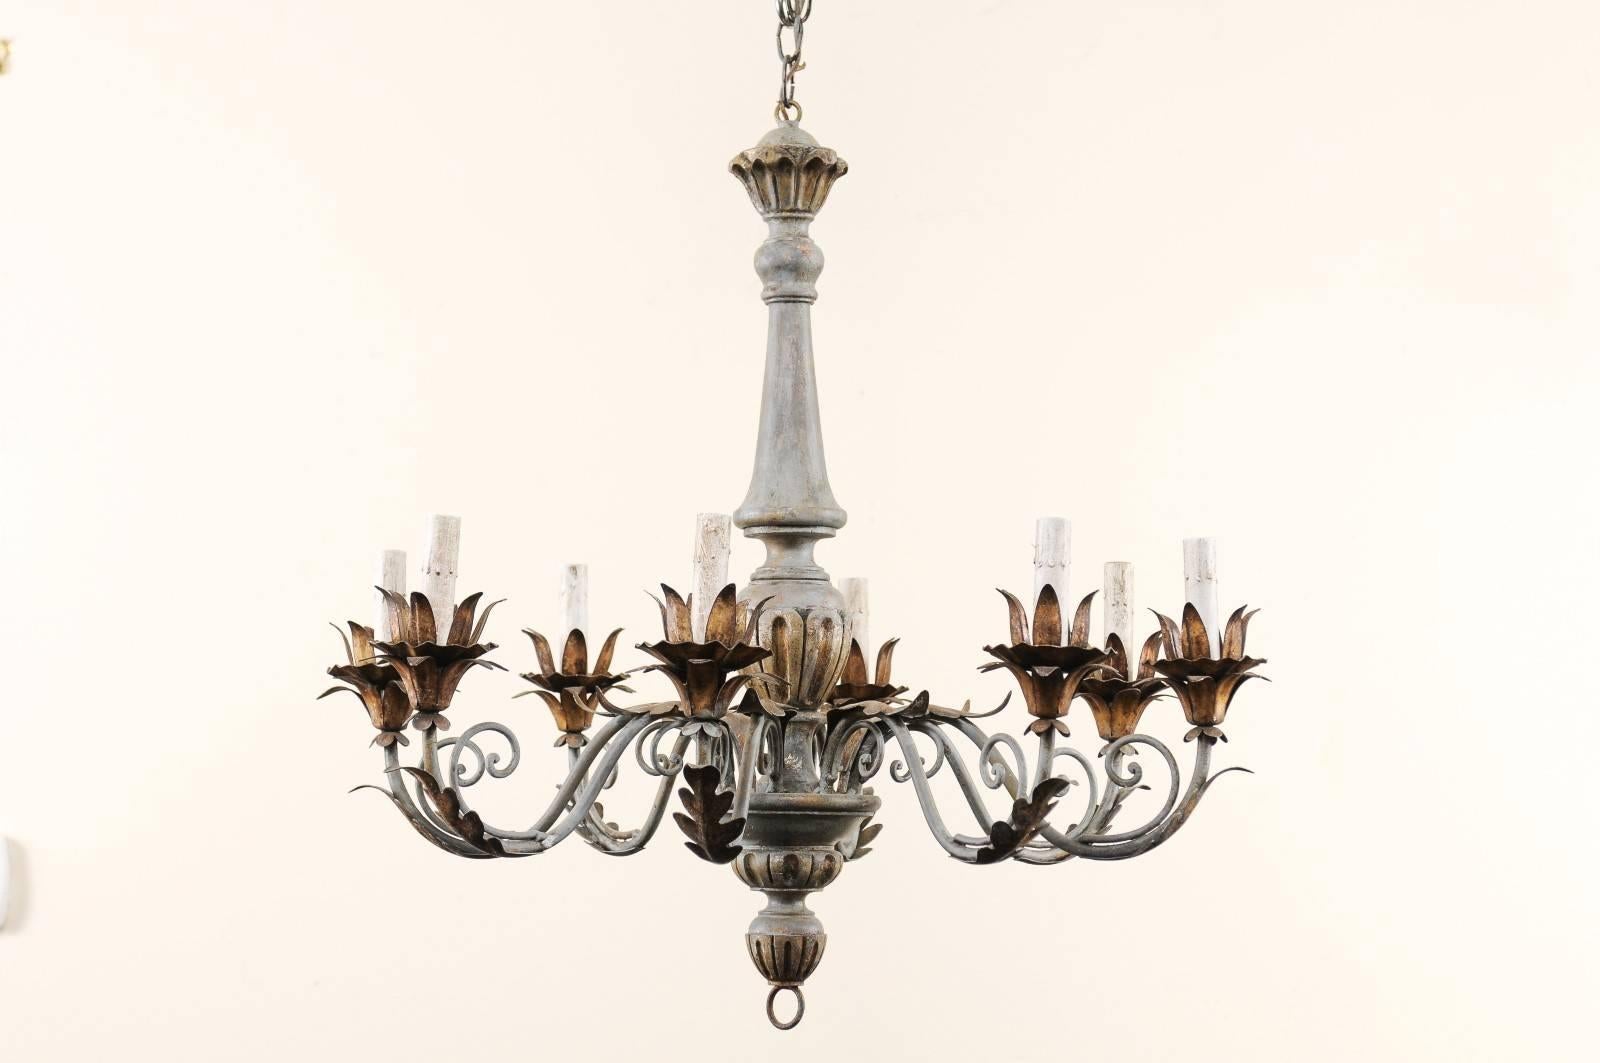 A French painted and gilded eight-light wooden chandelier from the mid-20th century. This French chandelier has carved central column with bottom ring finial, lovely scrolled metal arms that are decorated with acanthus leaf motifs. At the end of